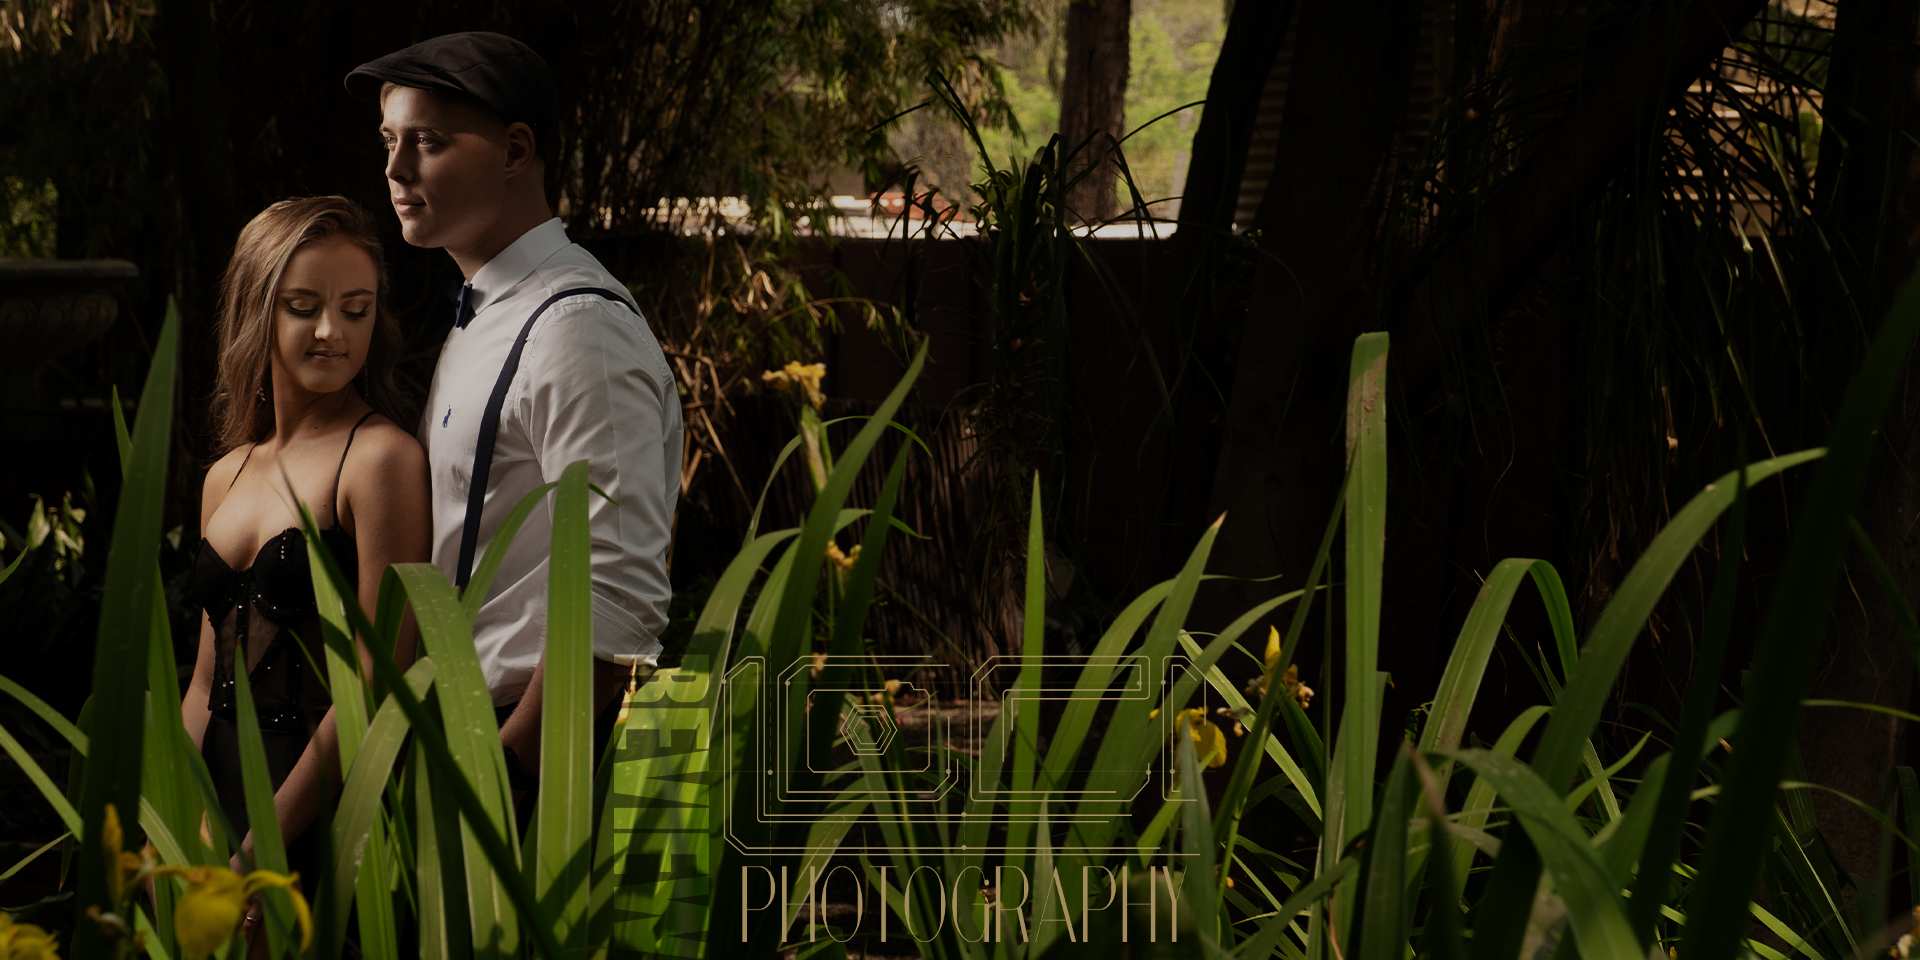 Blog header image for blog about a five star review for Loci Photography for matric dance images on location